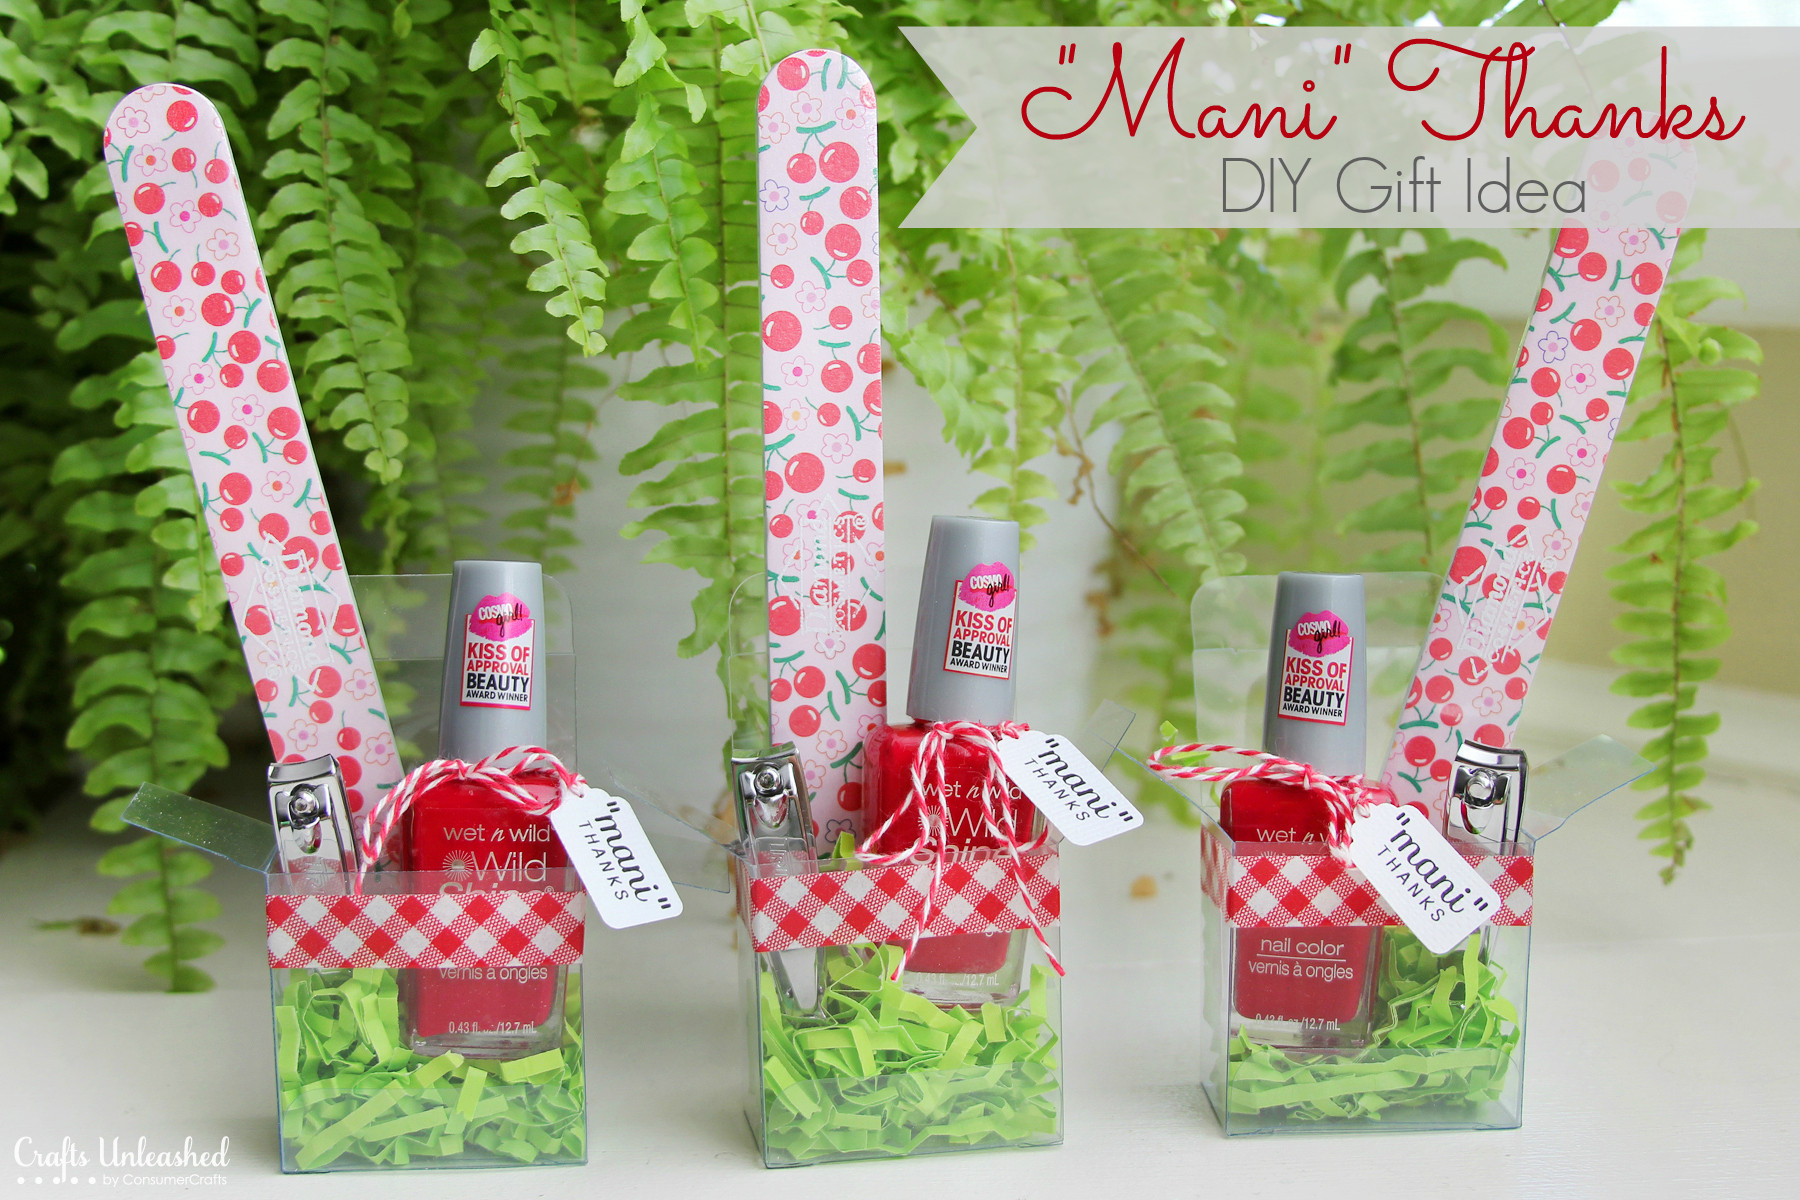 Craft Ideas For Christmas Gifts
 DIY Gift Idea for Girls "Mani Thanks" Manicure Set